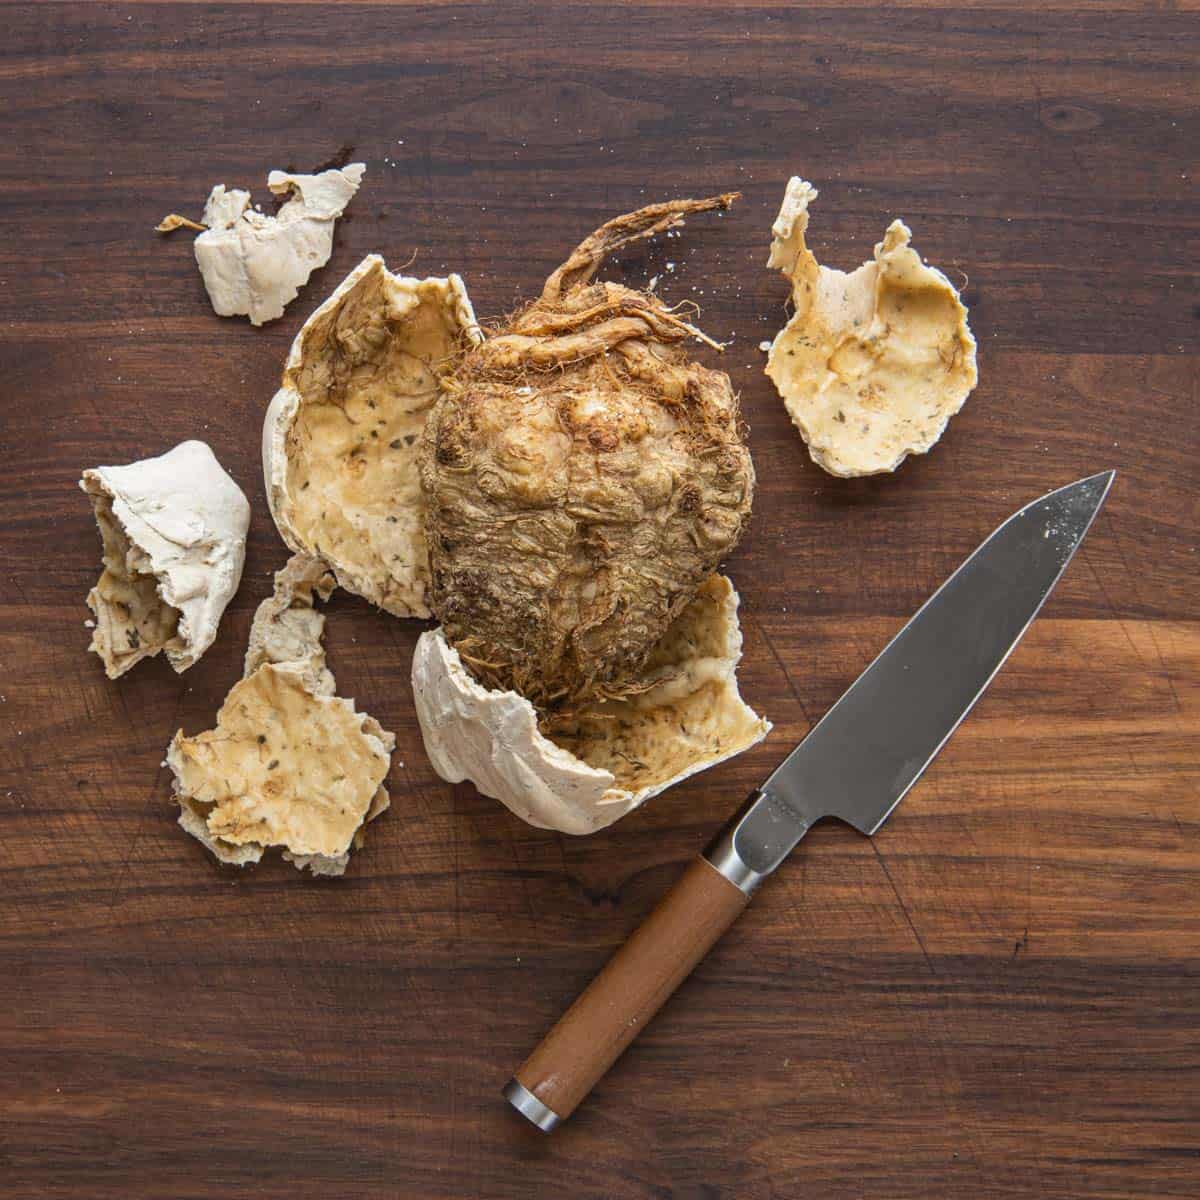 removing celeriac steak from a pastry crust